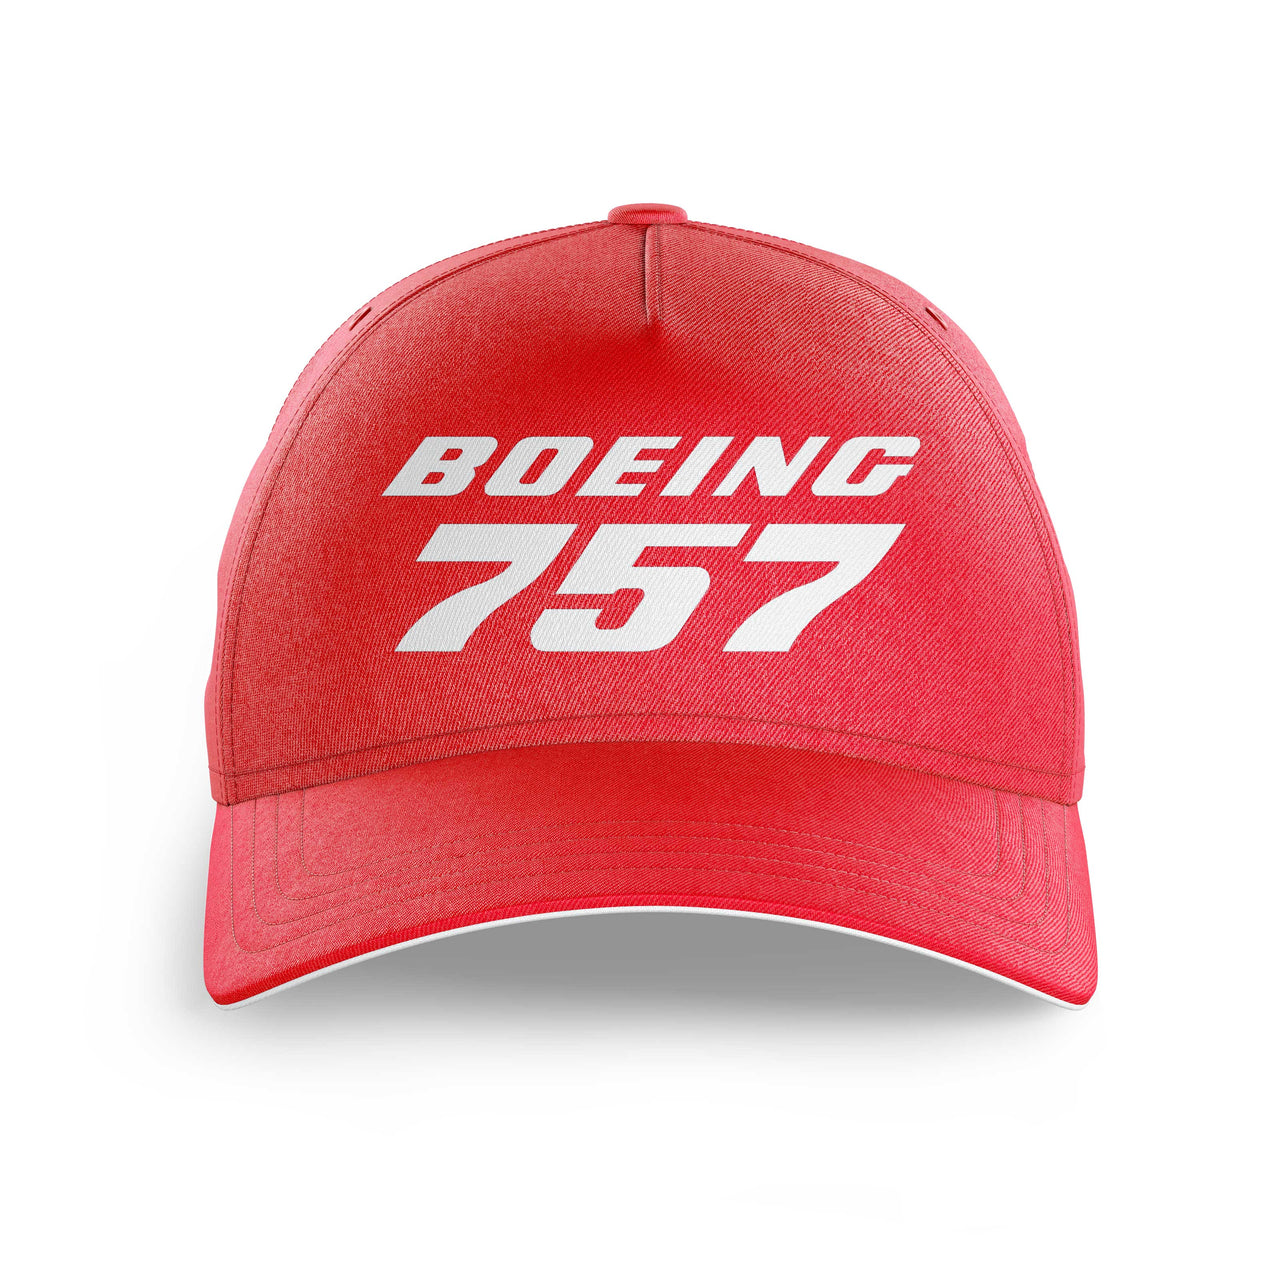 Boeing 757 & Text Printed Hats